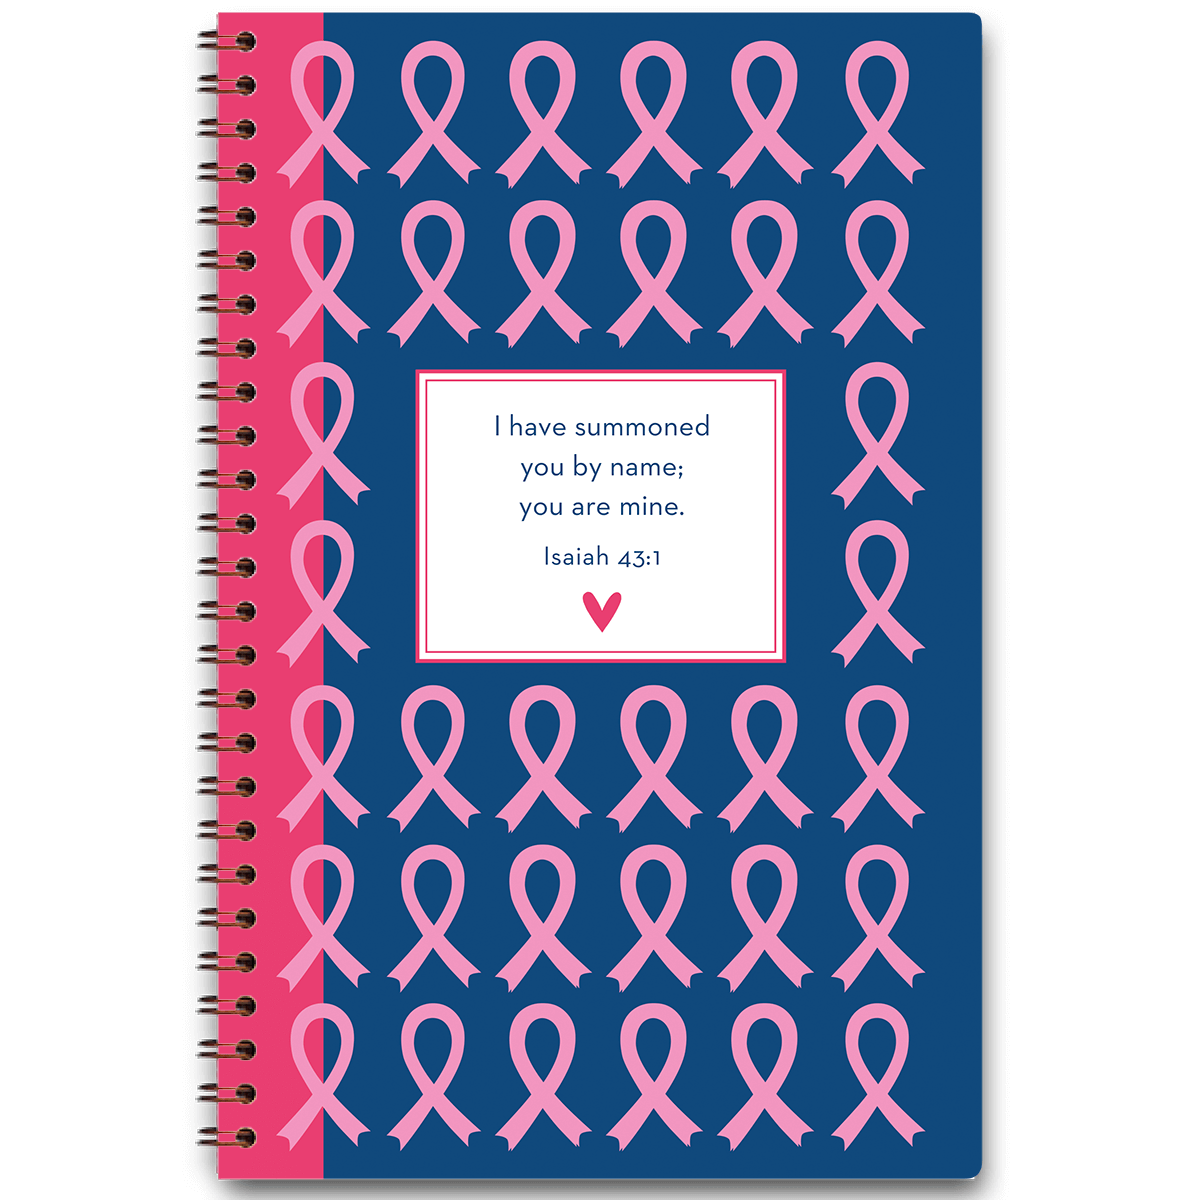 wire coil journal, breast cancer awareness, cancer gift